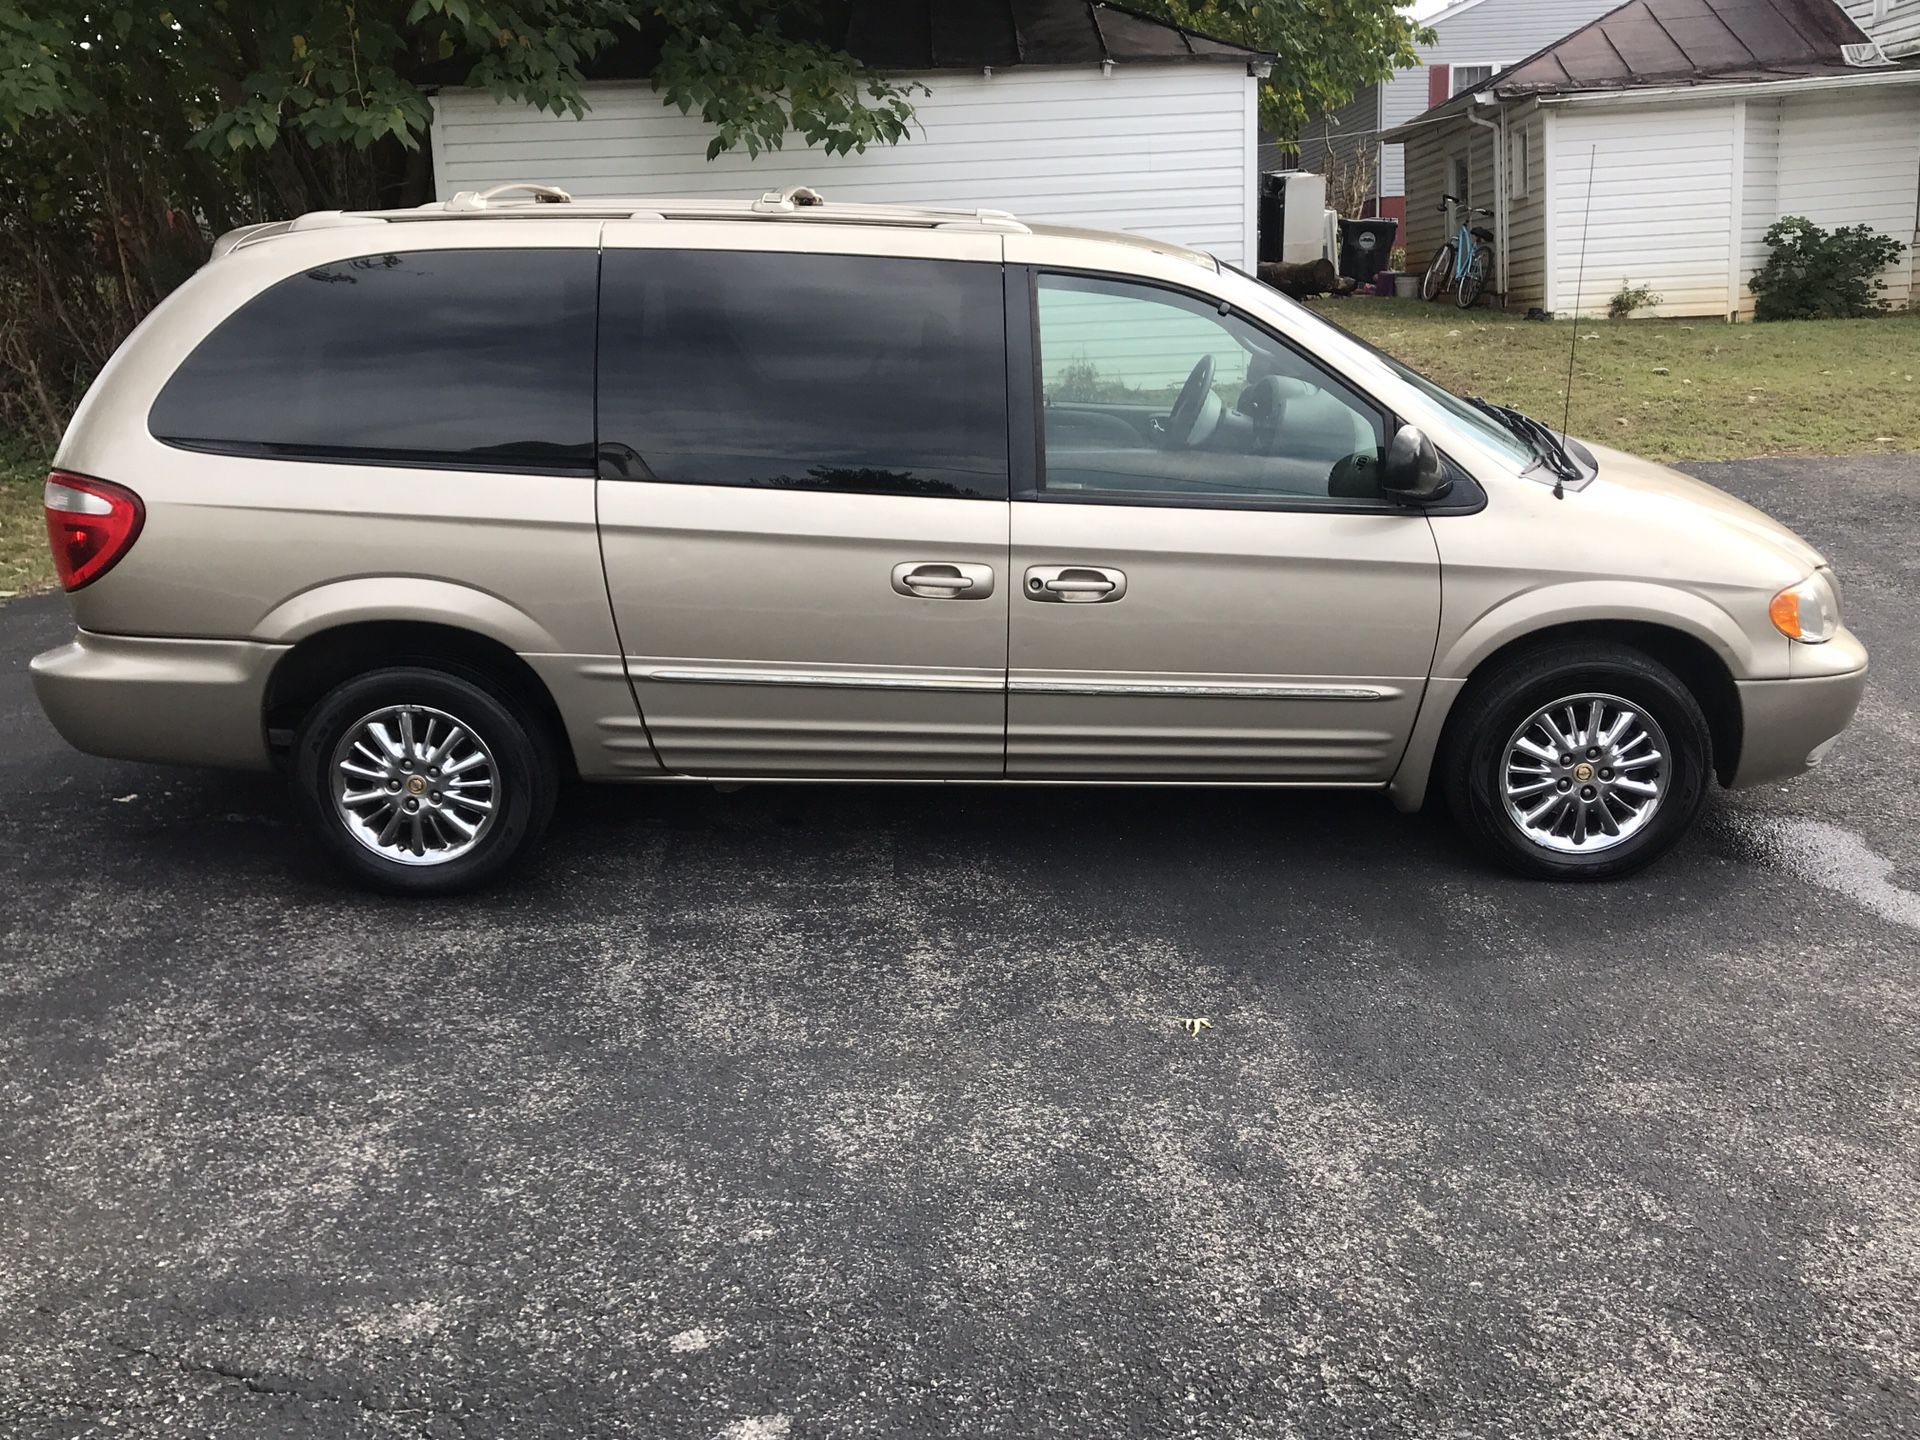 2002 Chrysler Town & Country